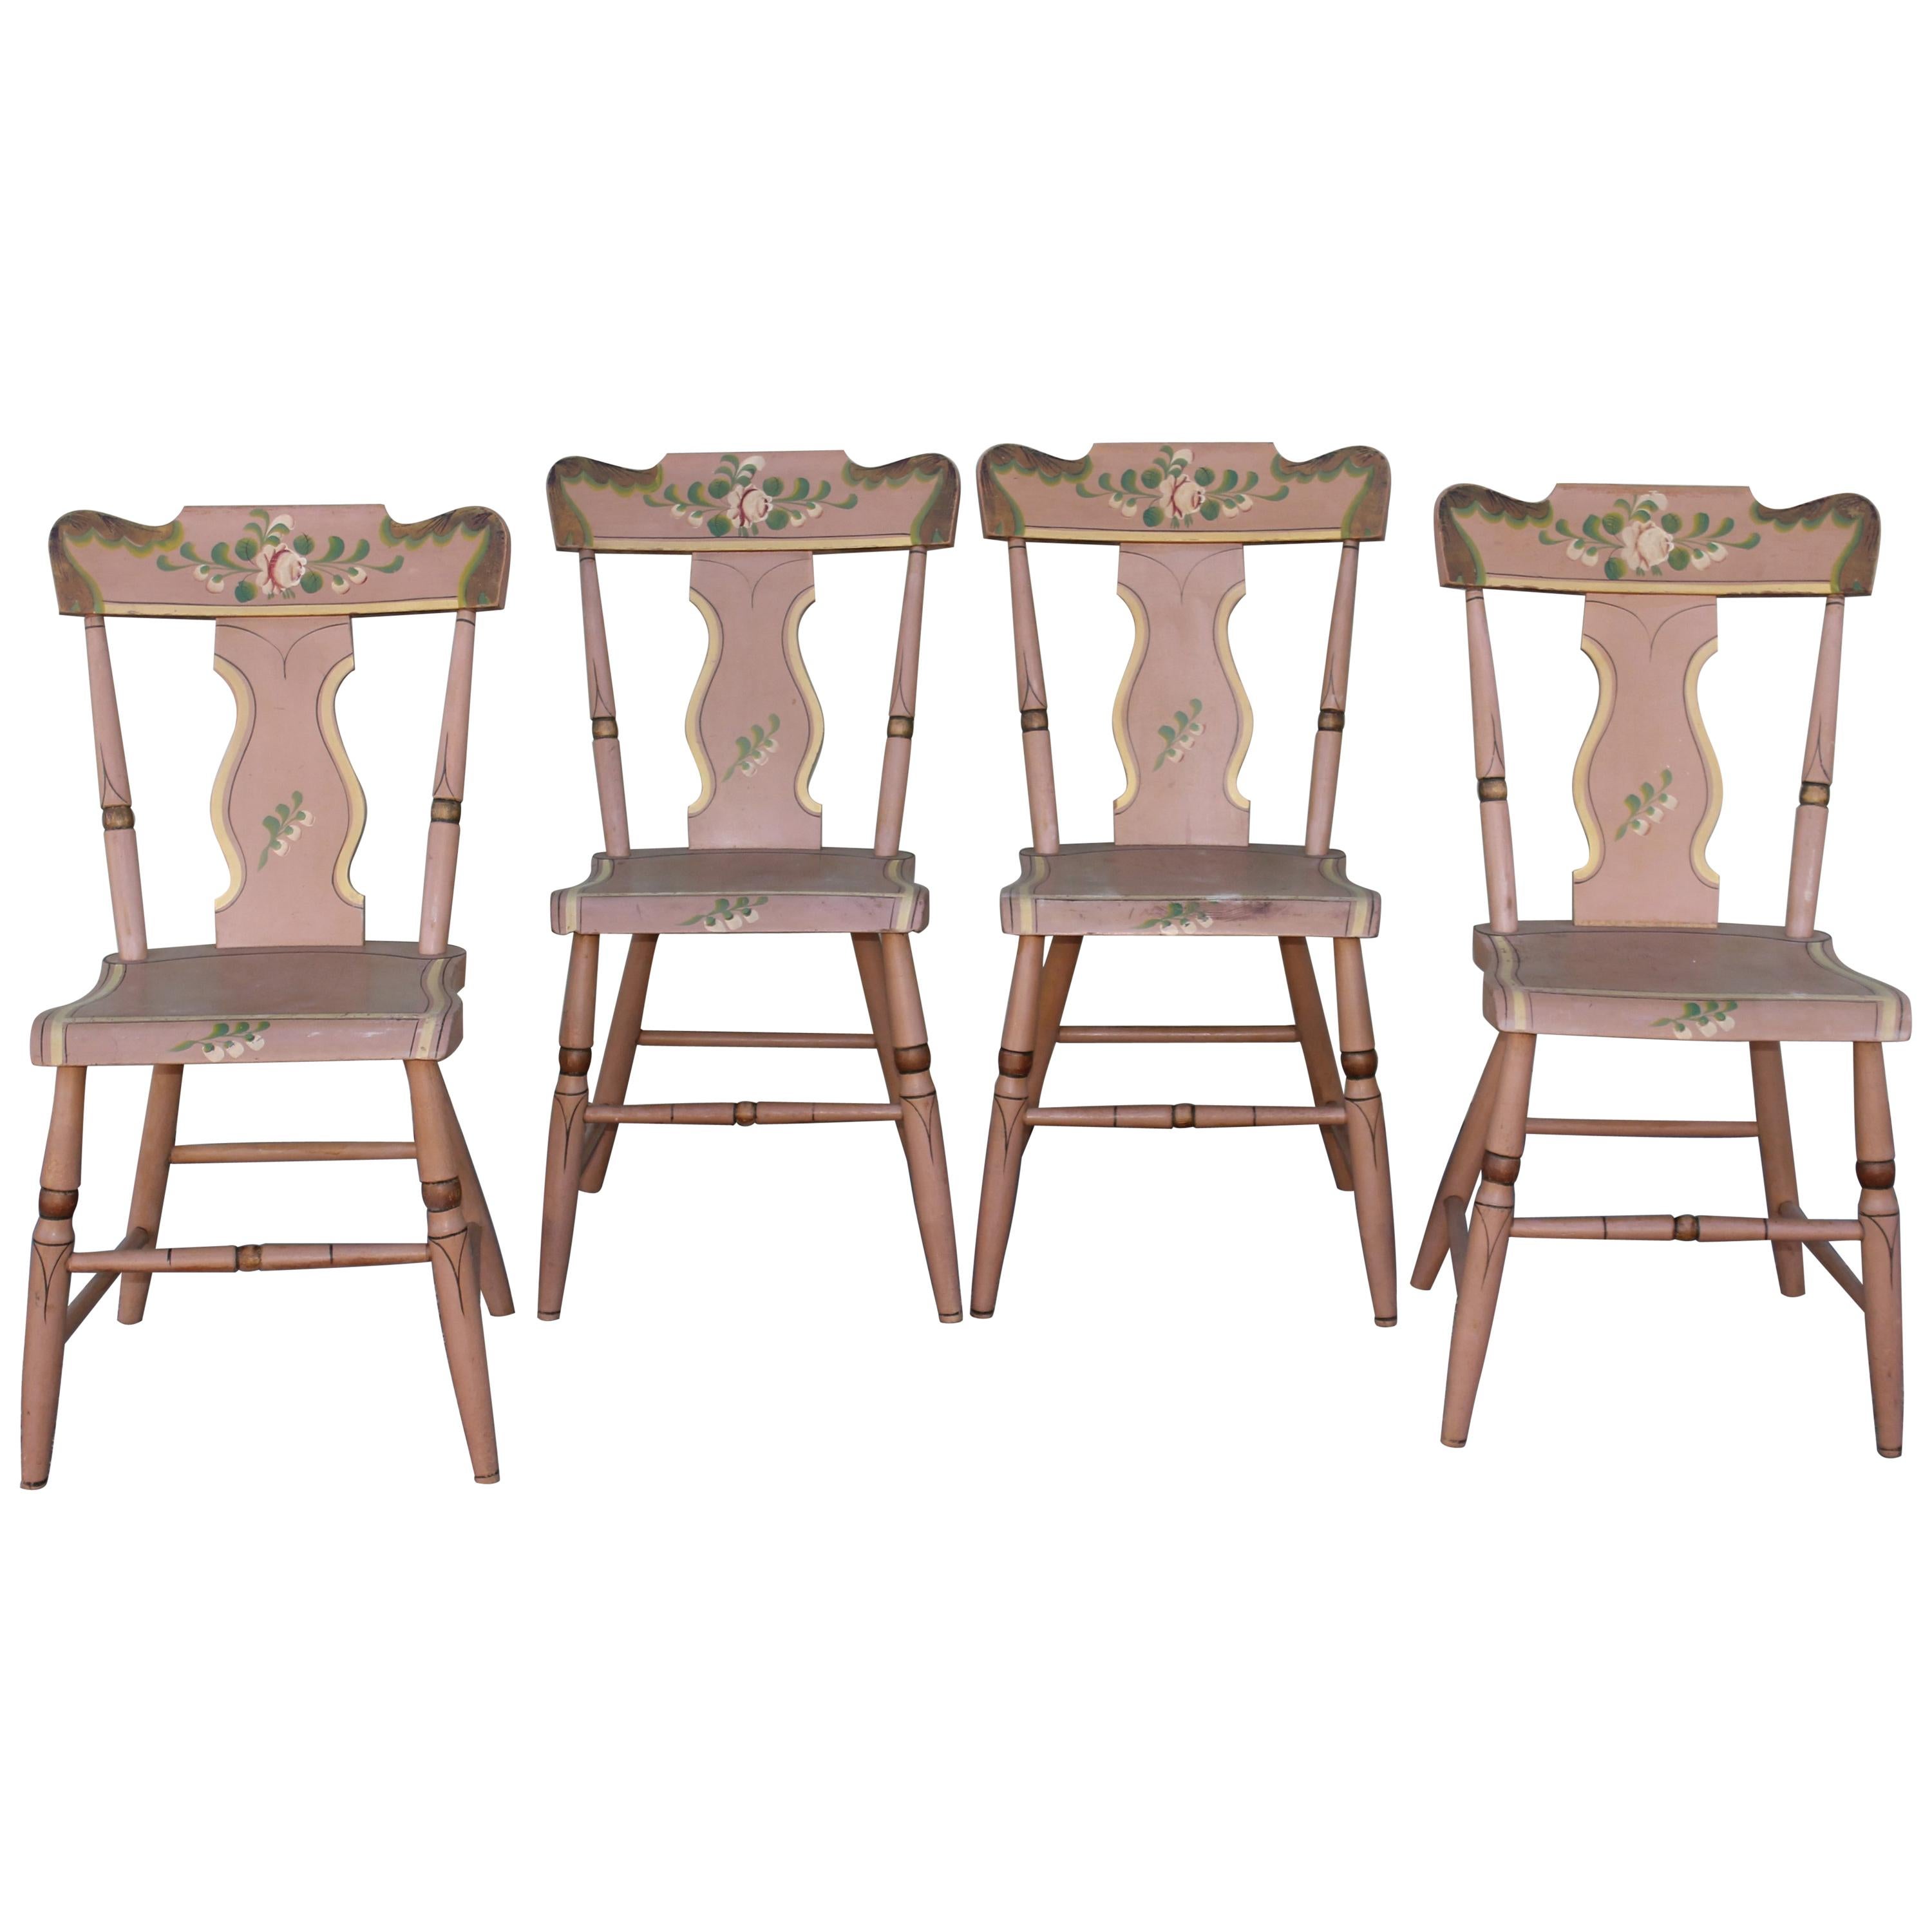 Set of Four 19th C Original Painted Pennsylvania Plank Bottom Chairs